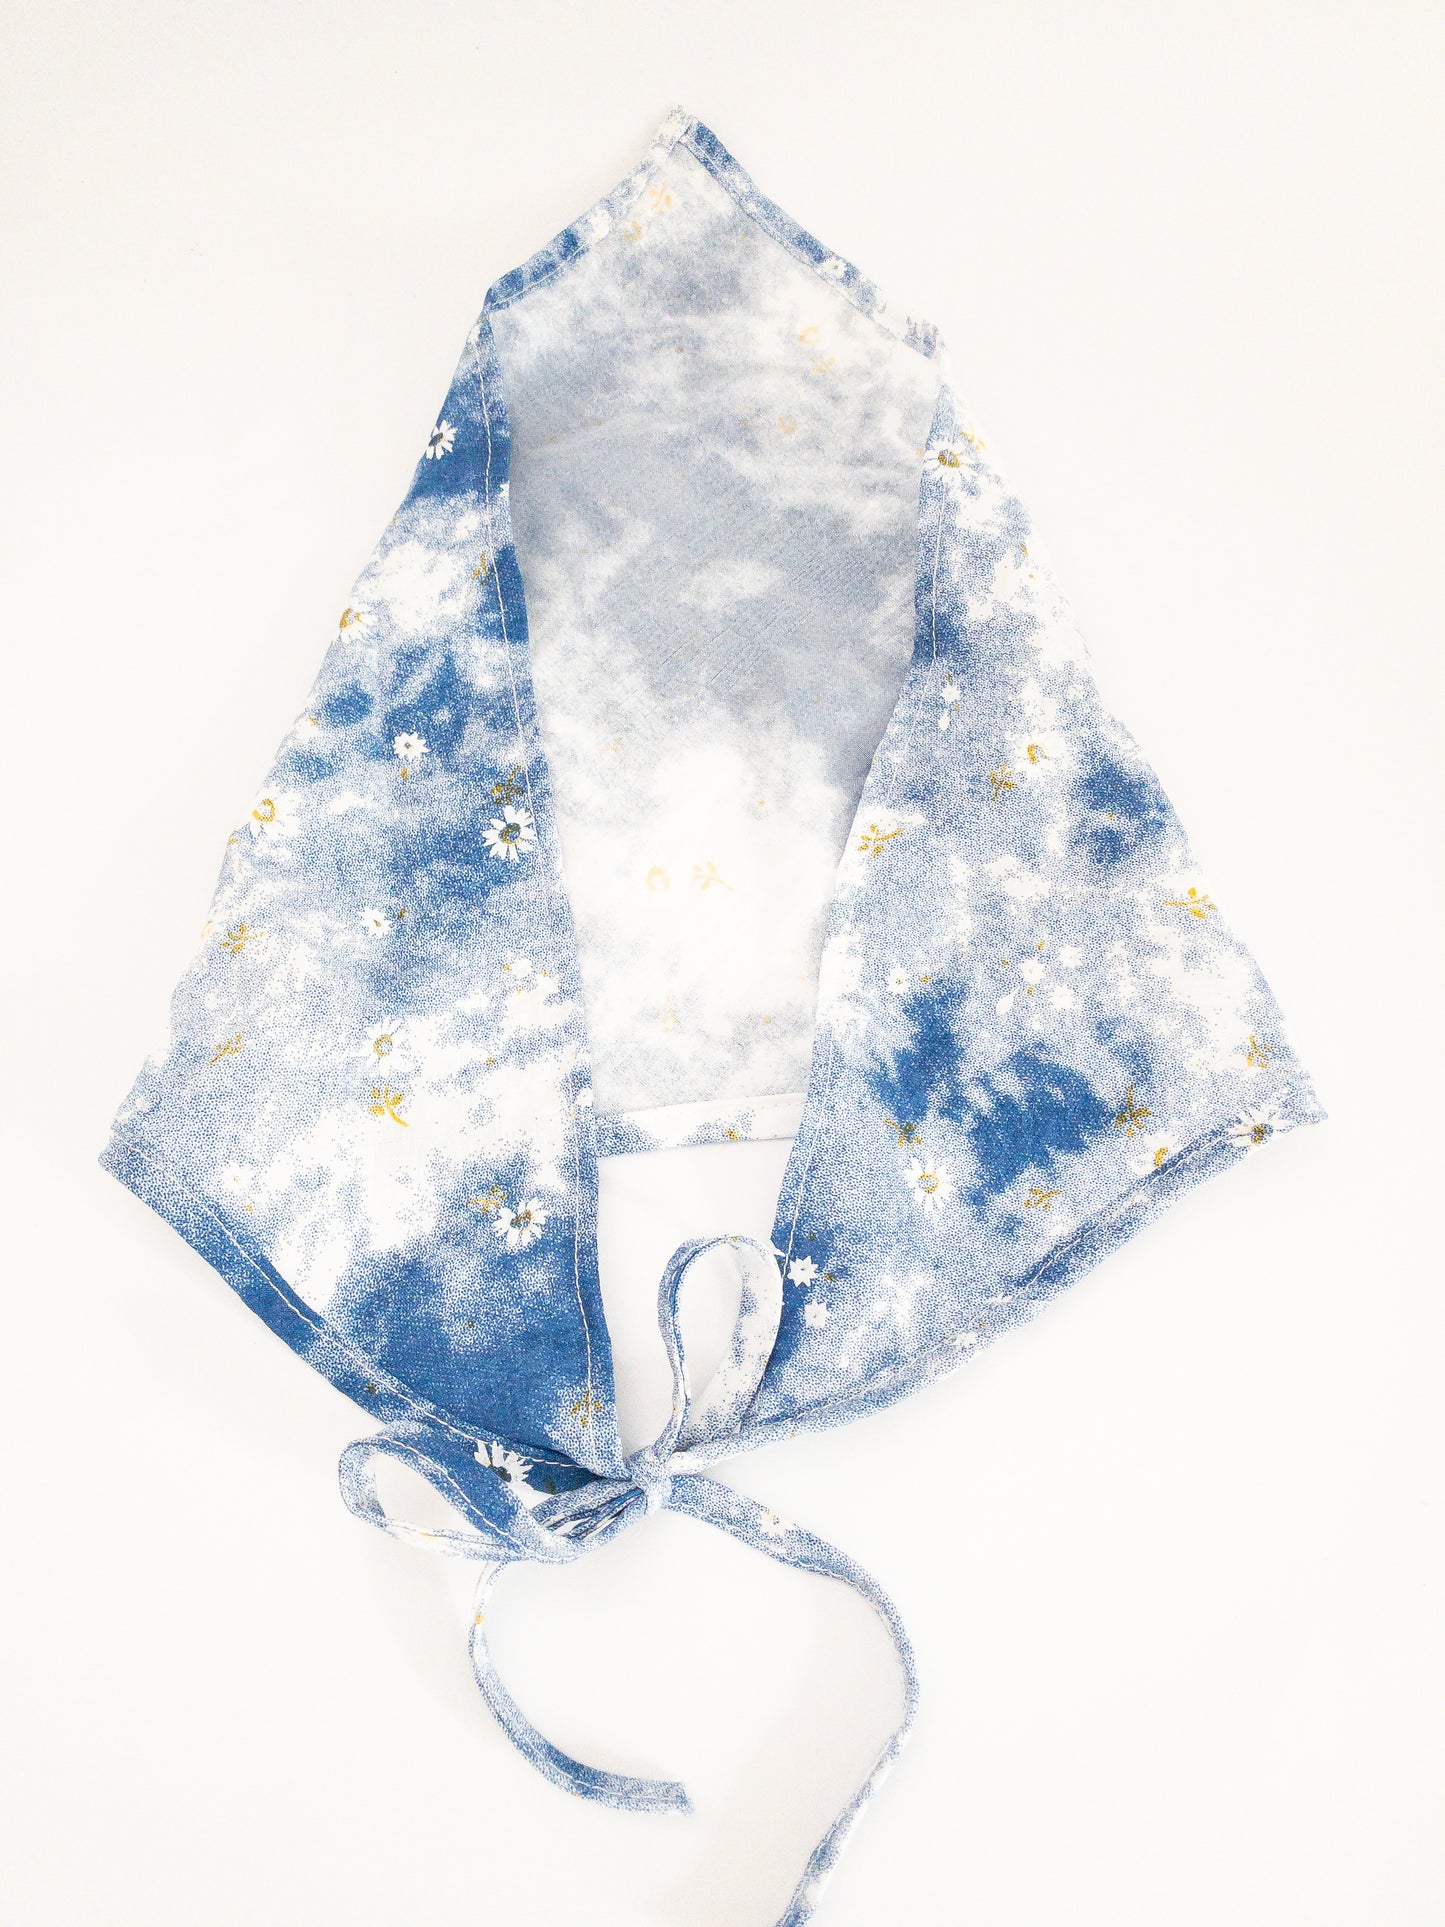 Two daisy print tie dye hair scarves to weave through your hair. Each set comes with one black and one blue. Each triangle hair scarf has straps to tie behind your head.  Korean hair accessories, Korean hair scarves, Korean hair scarf